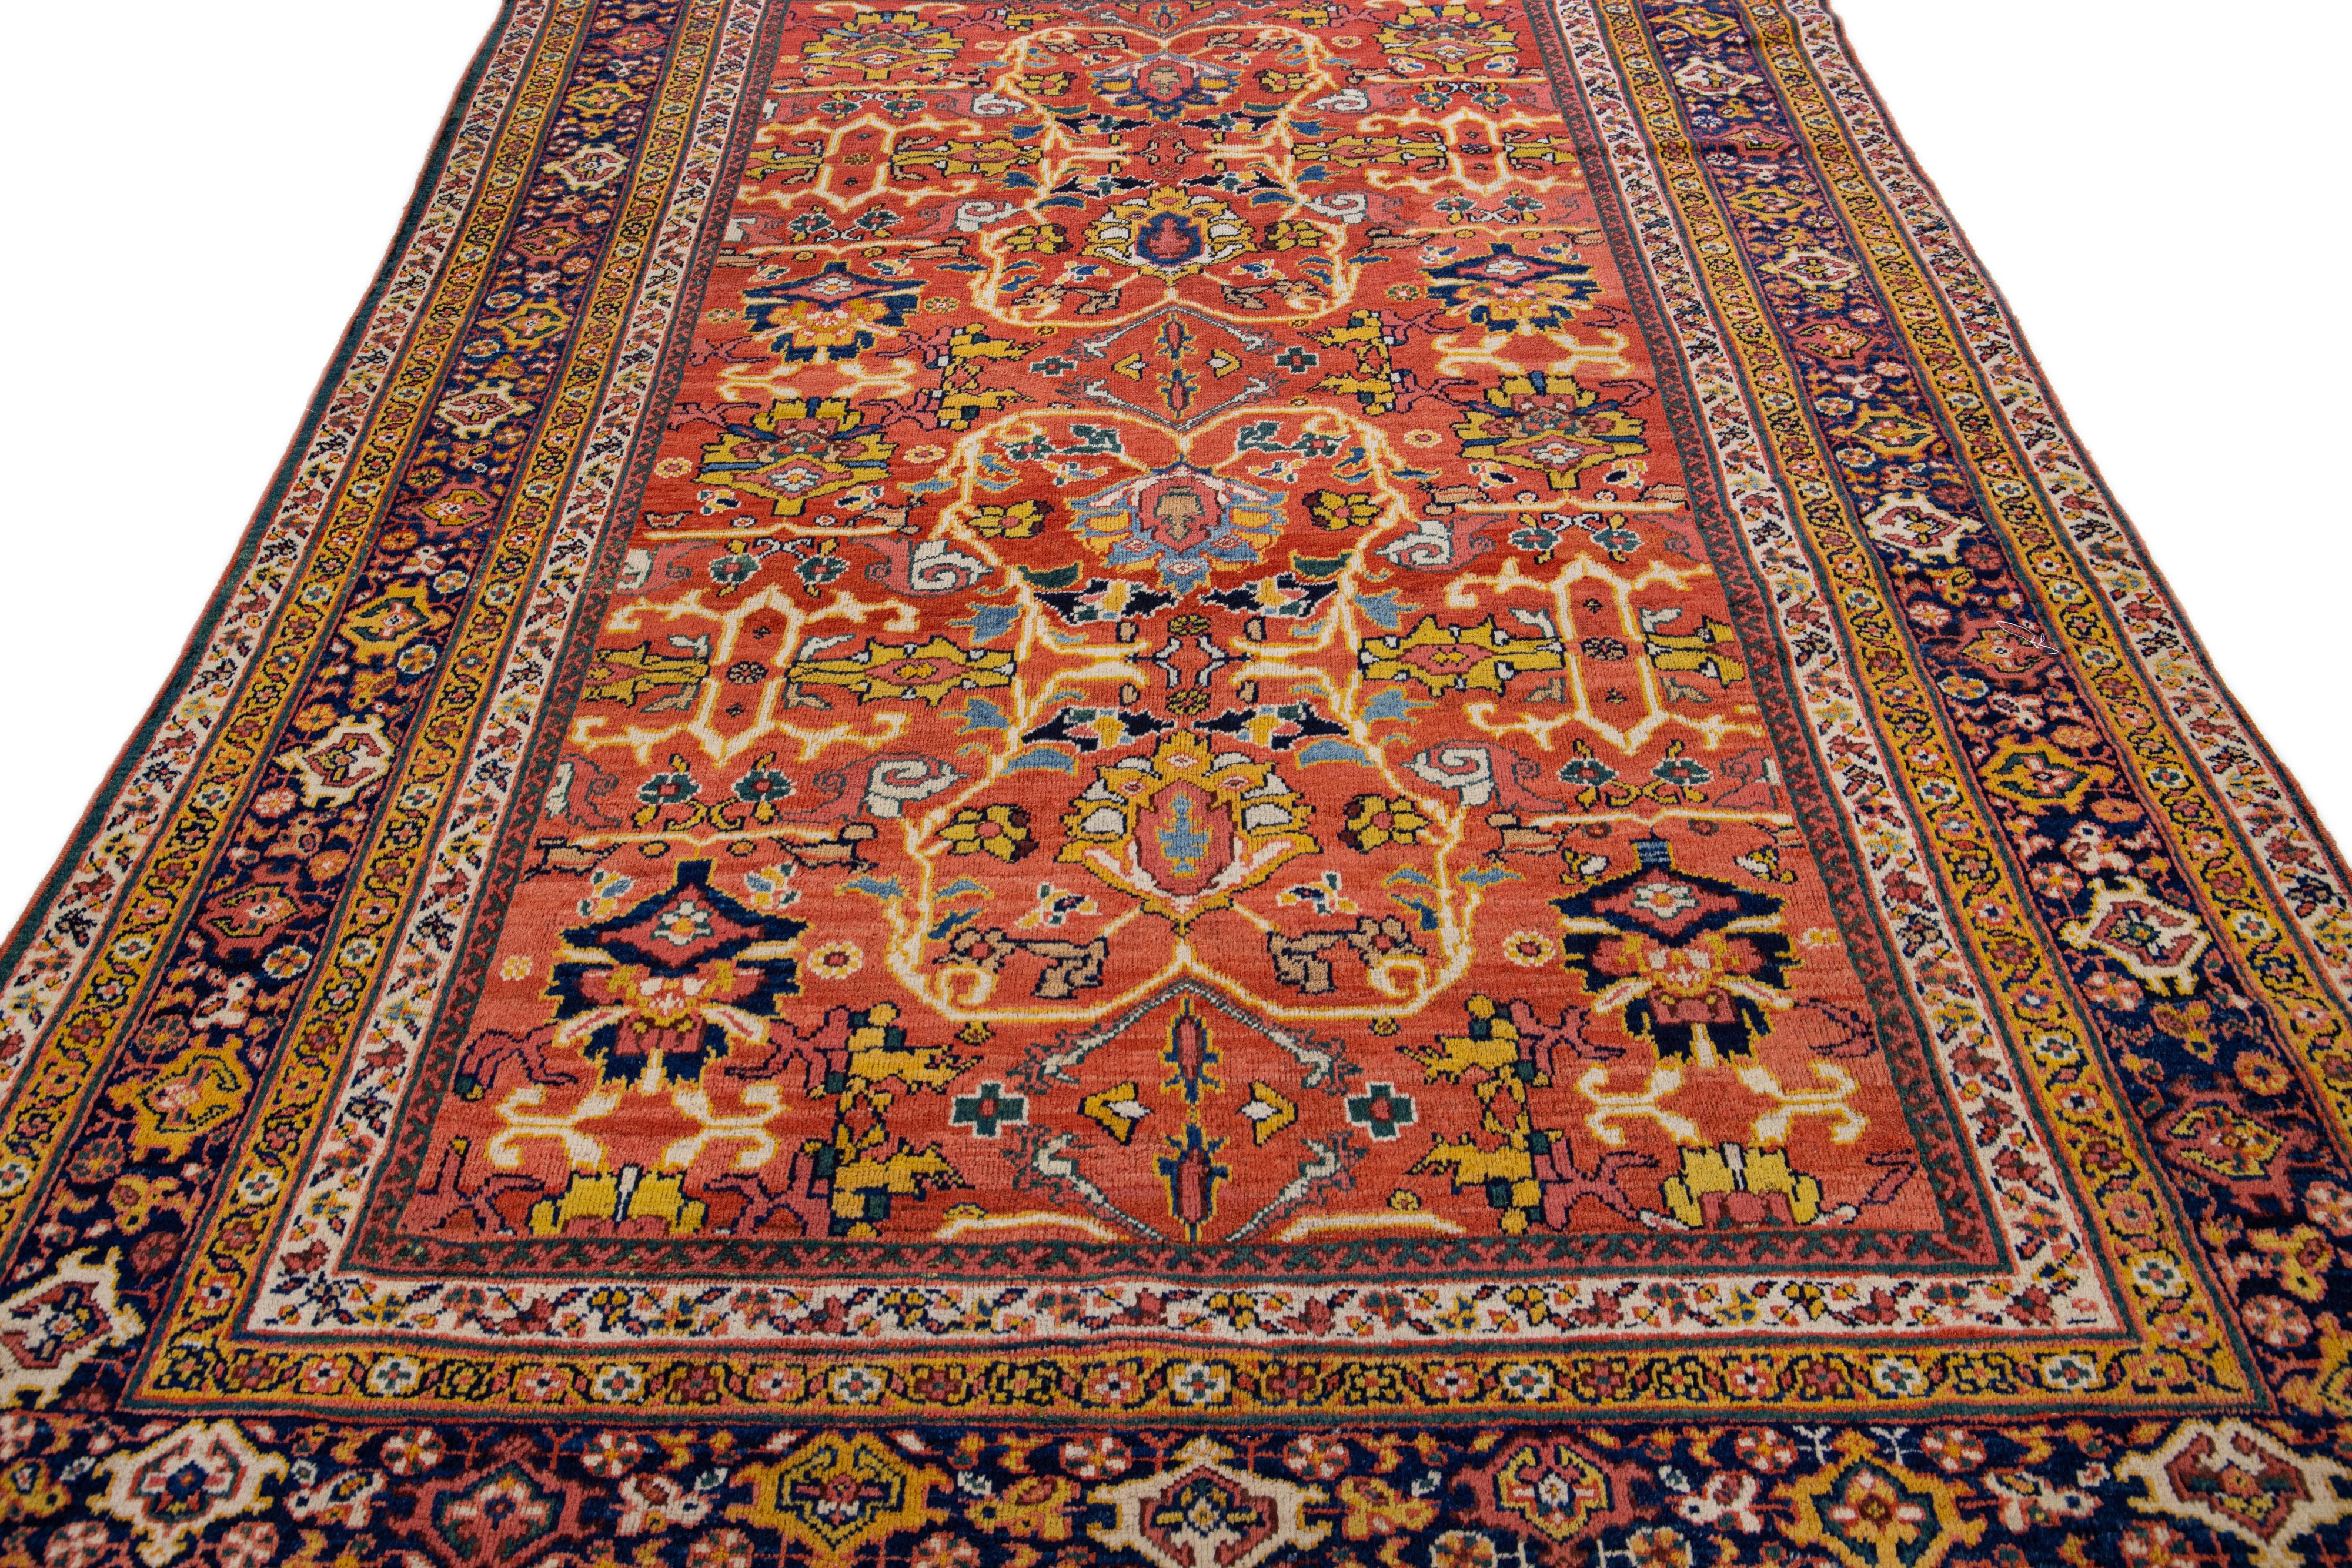 Beautiful modern Sultanabad hand-knotted wool rug with an orange-rust color field. This rug has pink, yellow, and blue accents in a gorgeous all-over floral design.

This rug measures: 6'9